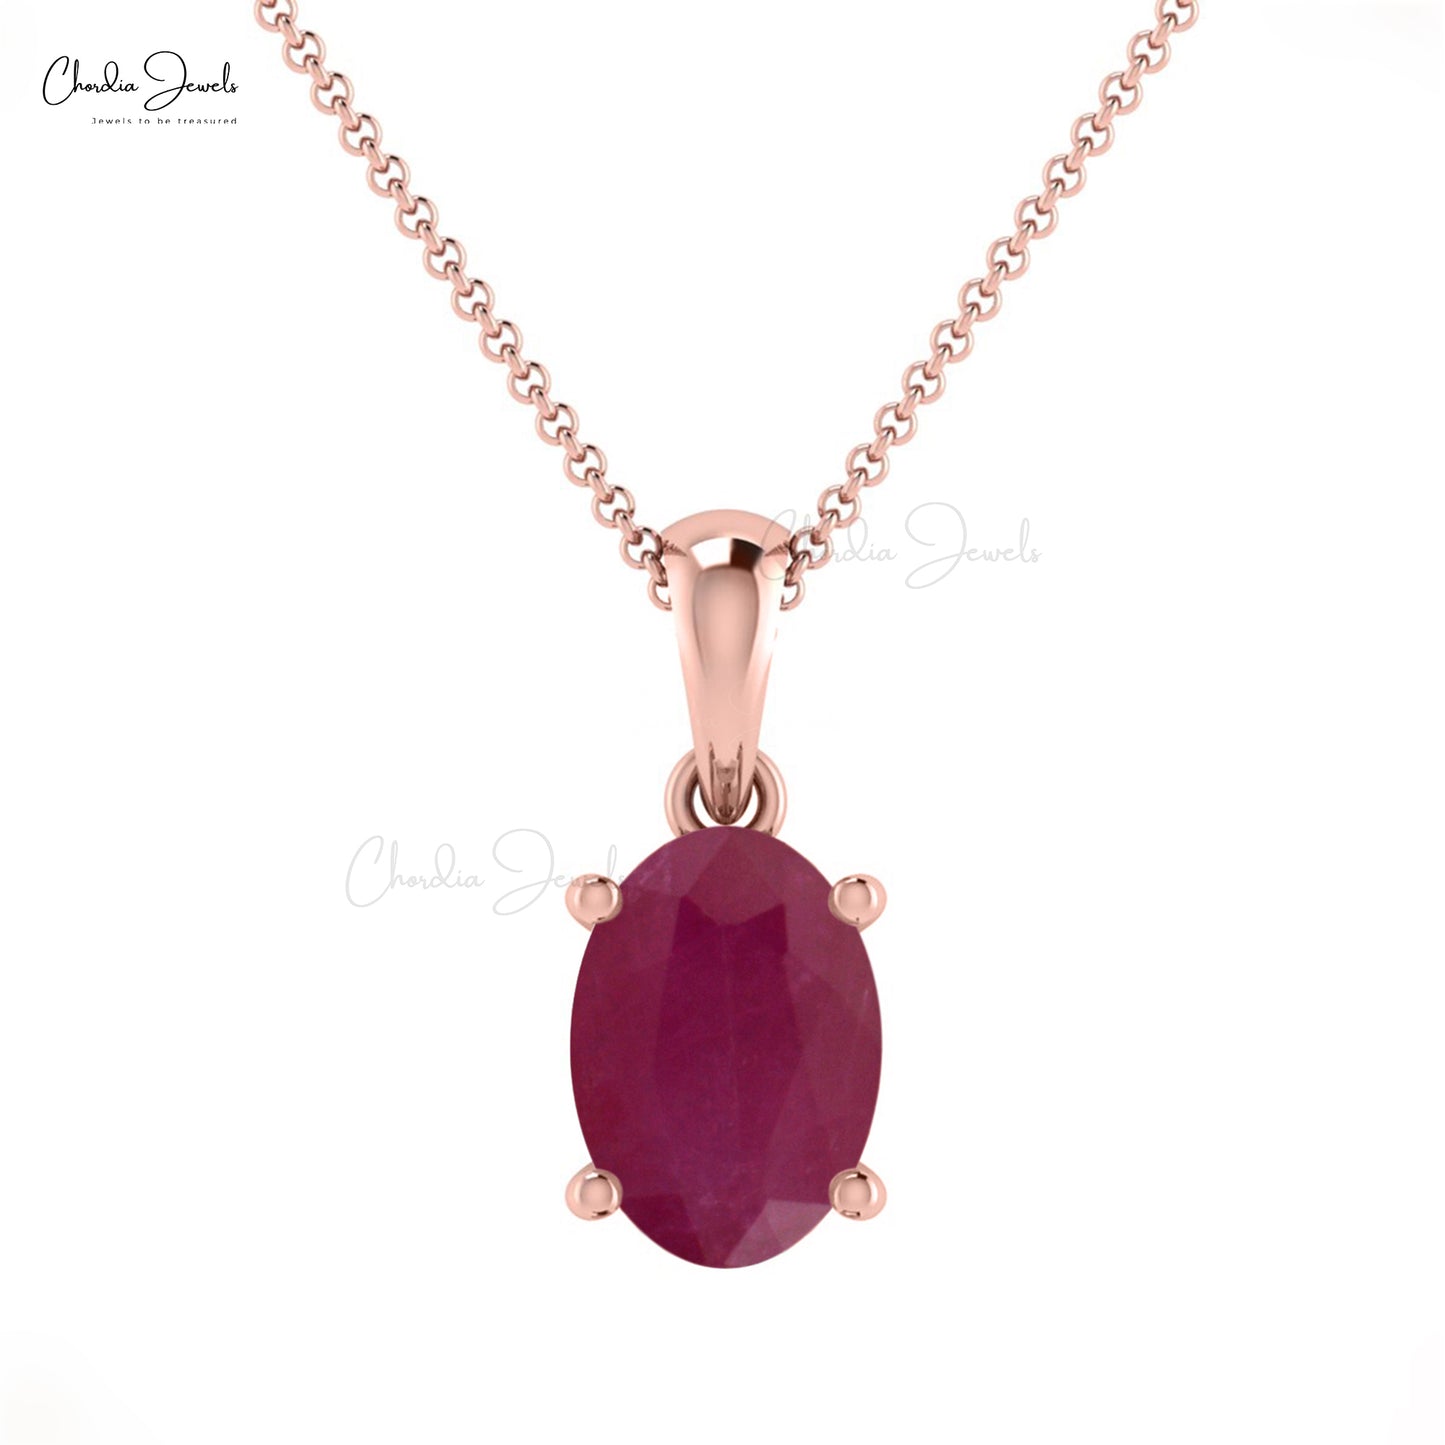 Modern Beautiful Gemstone Pendant Genuine Red Ruby Charms Pendant Necklace 14k Solid Gold Minimalist Jewelry Bridesmaids Gift